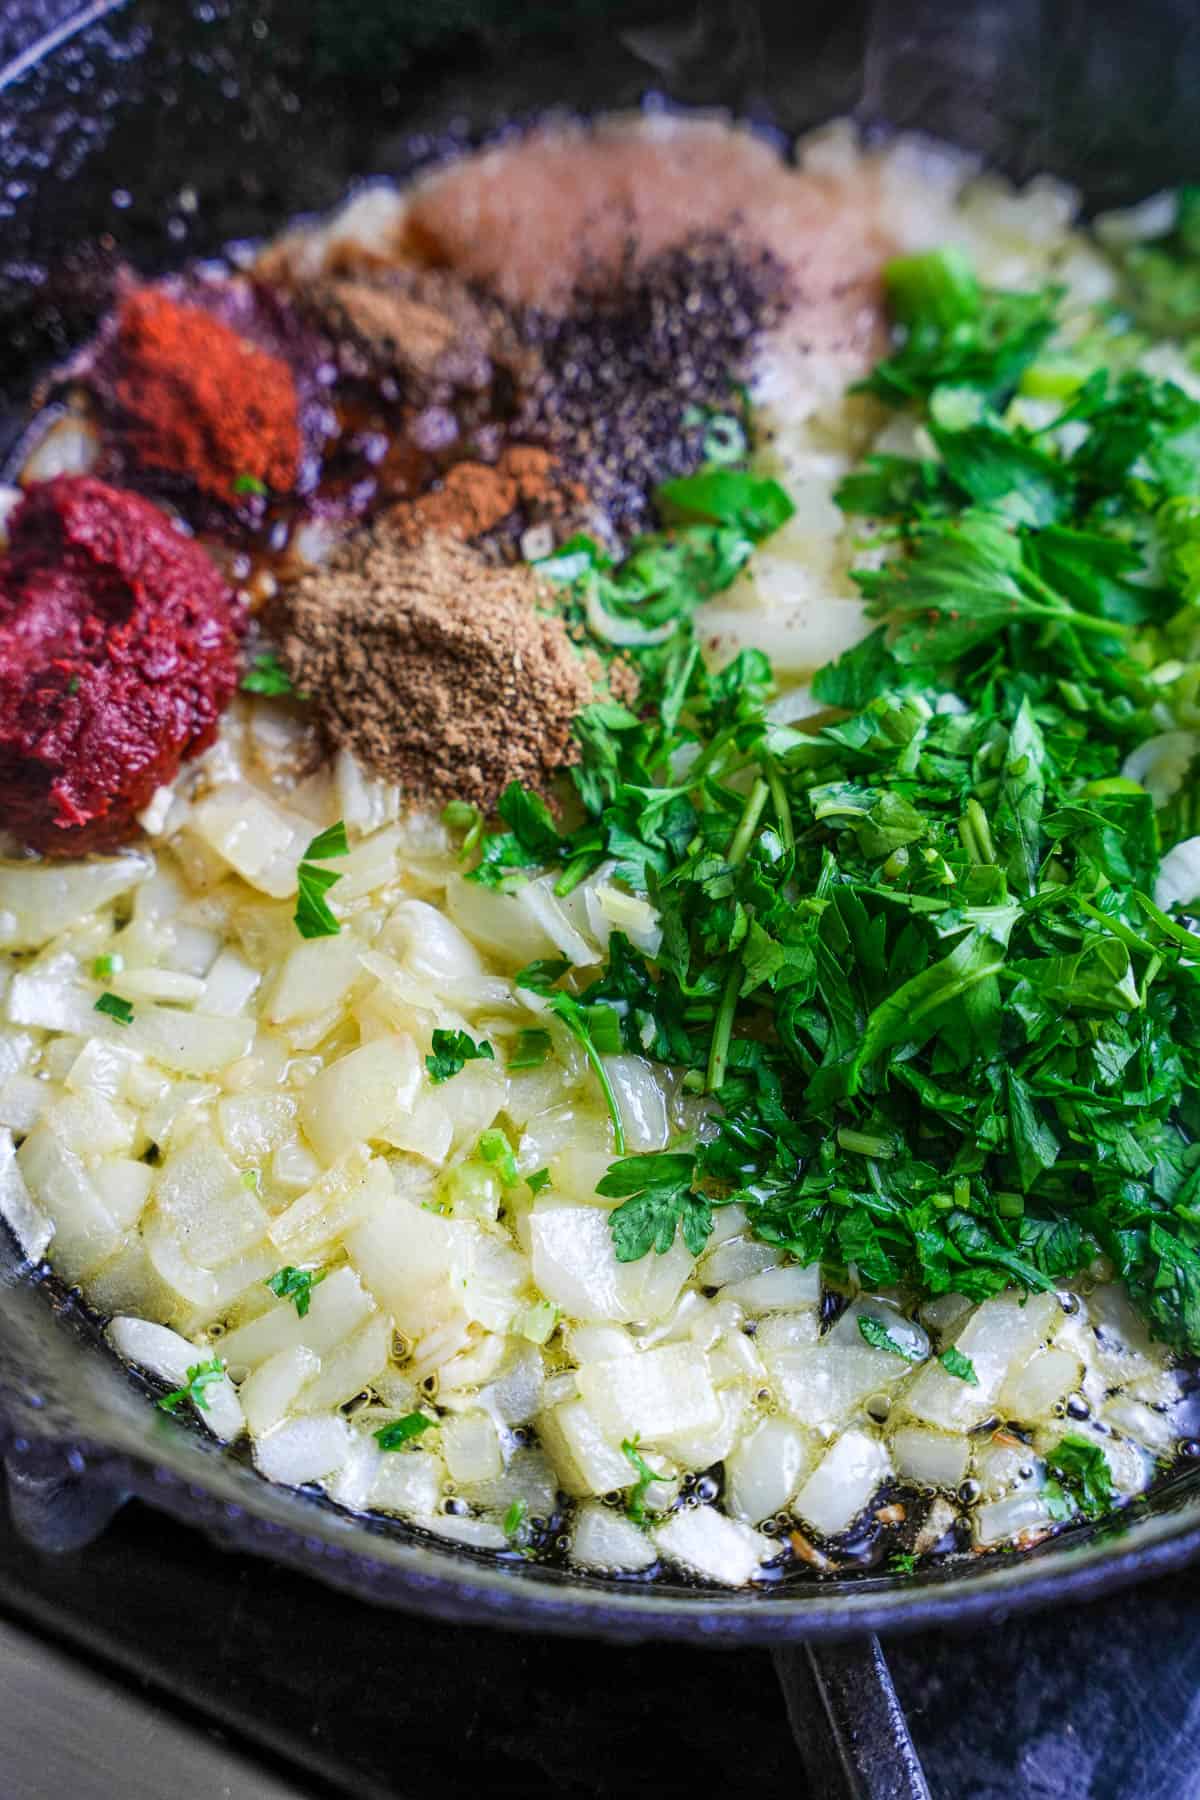 Pepper paste, parsley, and spices are added to the lightly golden, softened onions and garlic in a cast iron skillet.